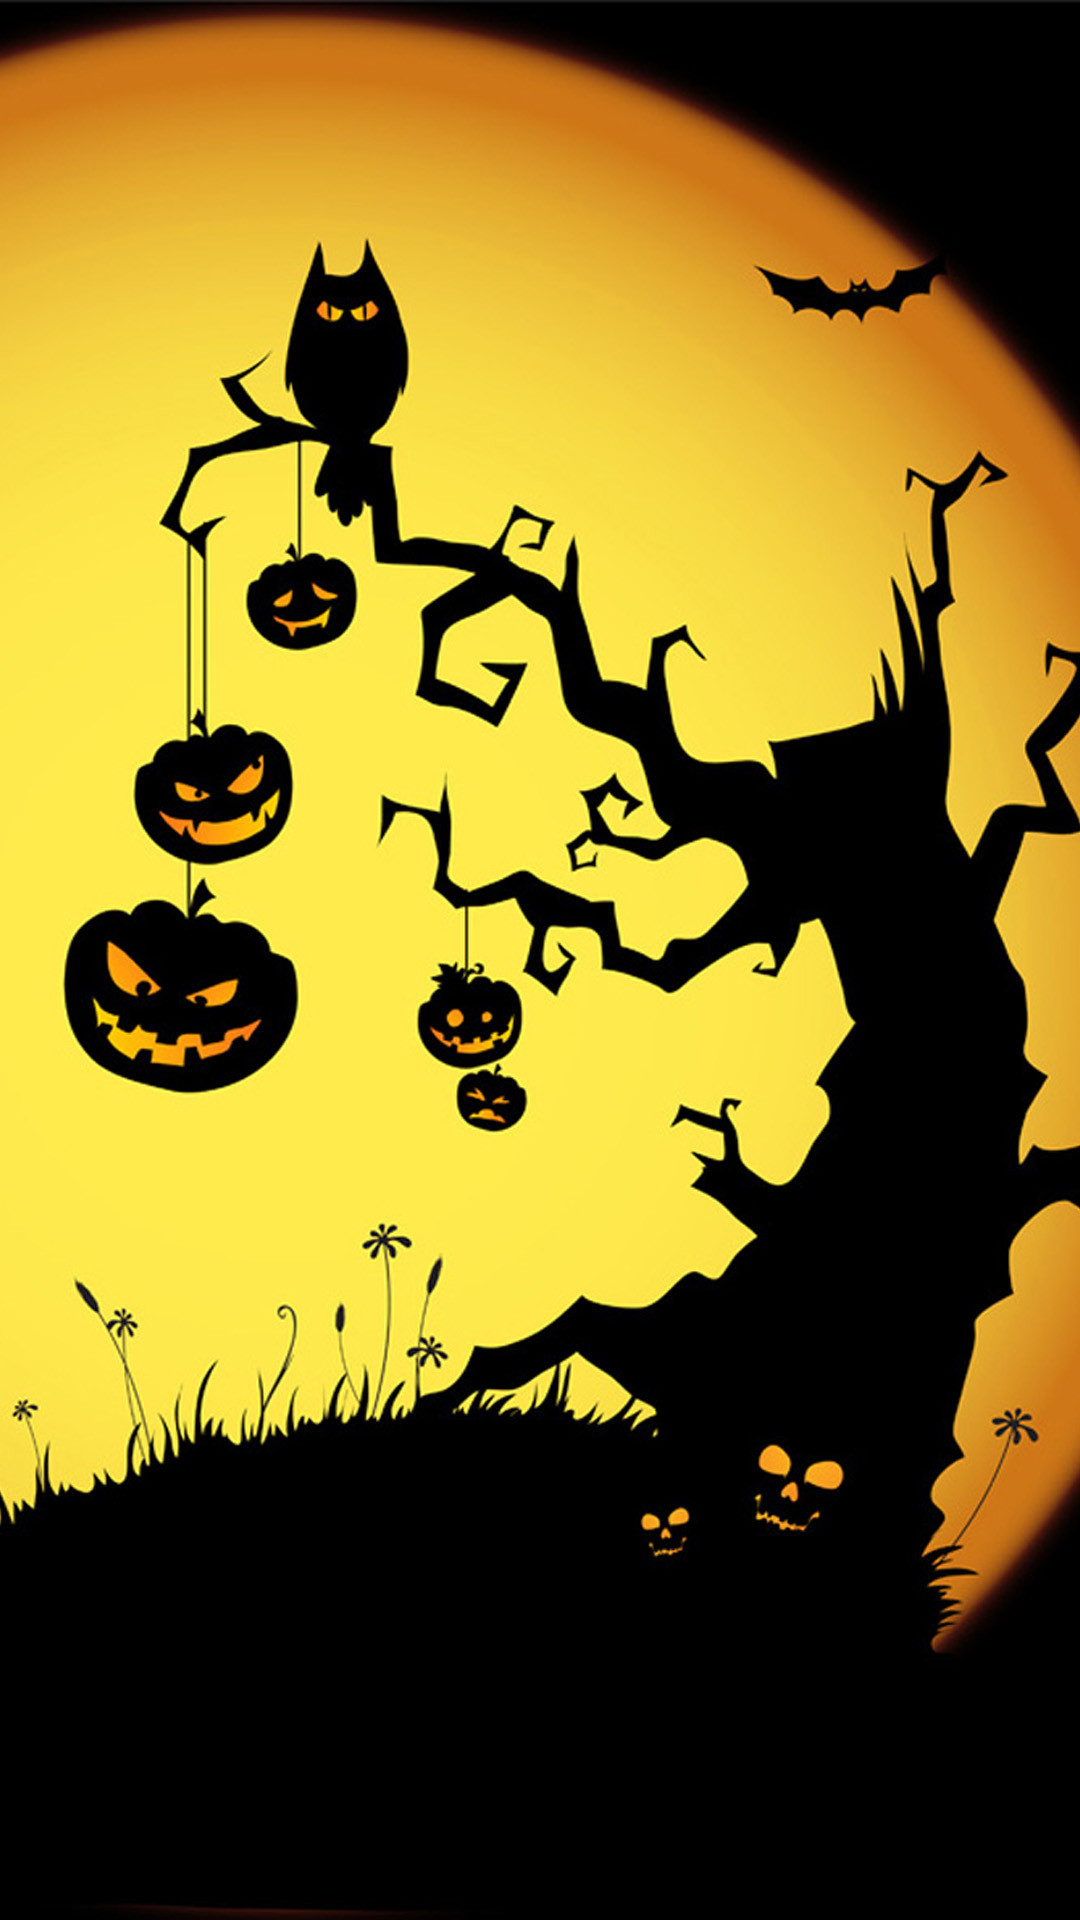 Live Halloween Wallpaper For iPhone Image